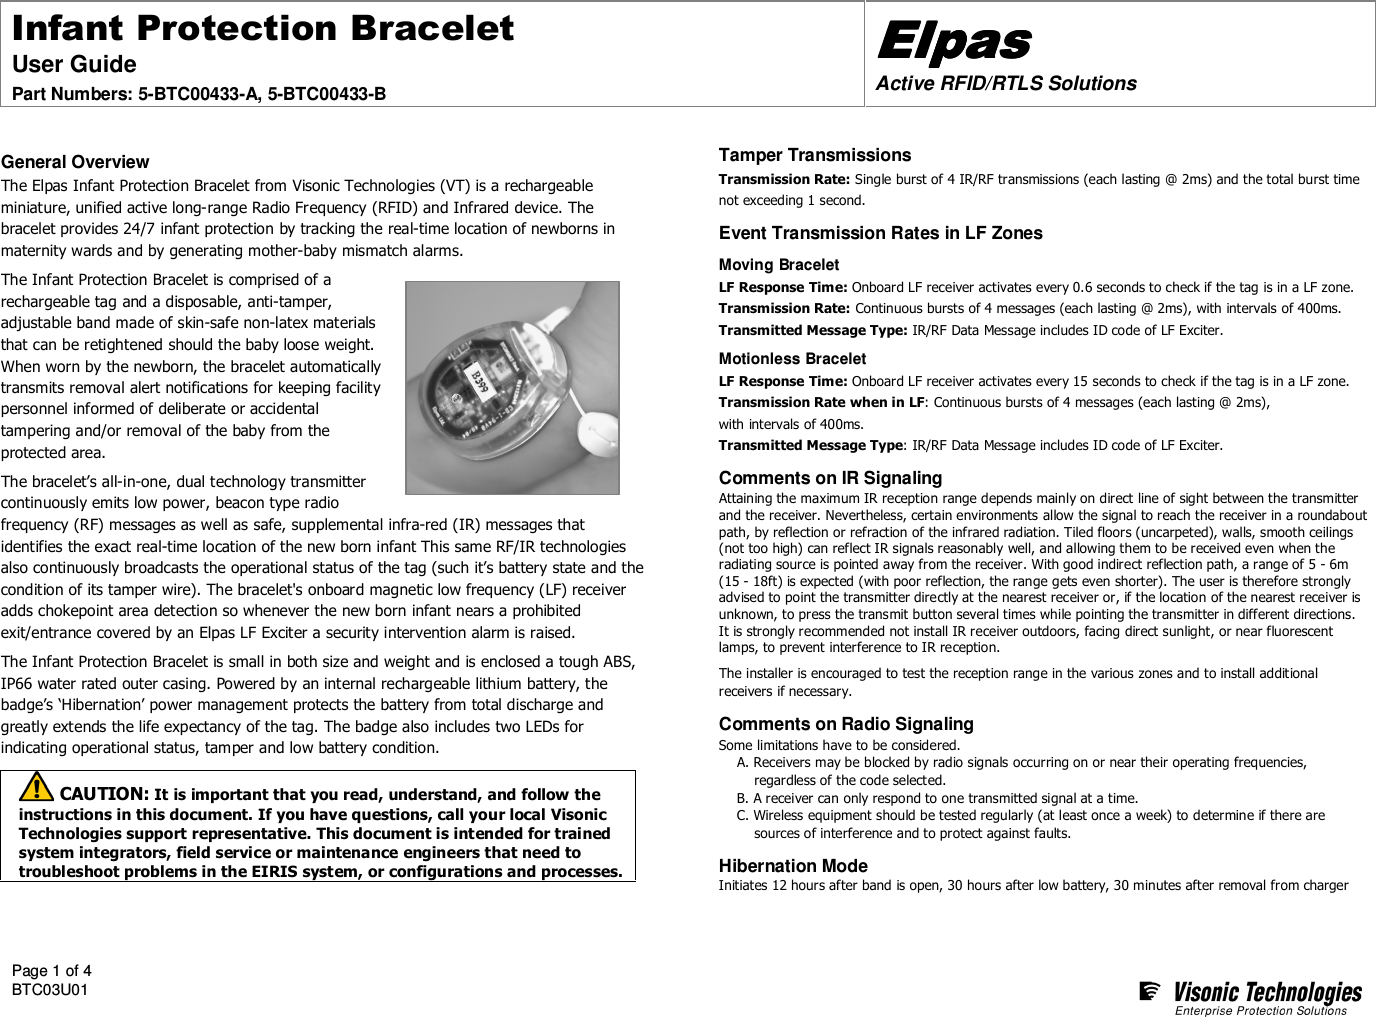 Infant Protection Bracelet User Guide  Part Numbers: 5-BTC00433-A, 5-BTC00433-B ElpasElpasElpasElpas    Active RFID/RTLS Solutions  Page 1 of 4 BTC03U01      General Overview The Elpas Infant Protection Bracelet from Visonic Technologies (VT) is a rechargeable miniature, unified active long-range Radio Frequency (RFID) and Infrared device. The bracelet provides 24/7 infant protection by tracking the real-time location of newborns in maternity wards and by generating mother-baby mismatch alarms. The Infant Protection Bracelet is comprised of a rechargeable tag and a disposable, anti-tamper, adjustable band made of skin-safe non-latex materials that can be retightened should the baby loose weight. When worn by the newborn, the bracelet automatically transmits removal alert notifications for keeping facility personnel informed of deliberate or accidental tampering and/or removal of the baby from the protected area. The bracelet’s all-in-one, dual technology transmitter continuously emits low power, beacon type radio frequency (RF) messages as well as safe, supplemental infra-red (IR) messages that identifies the exact real-time location of the new born infant This same RF/IR technologies also continuously broadcasts the operational status of the tag (such it’s battery state and the condition of its tamper wire). The bracelet&apos;s onboard magnetic low frequency (LF) receiver adds chokepoint area detection so whenever the new born infant nears a prohibited exit/entrance covered by an Elpas LF Exciter a security intervention alarm is raised. The Infant Protection Bracelet is small in both size and weight and is enclosed a tough ABS, IP66 water rated outer casing. Powered by an internal rechargeable lithium battery, the badge’s ‘Hibernation’ power management protects the battery from total discharge and greatly extends the life expectancy of the tag. The badge also includes two LEDs for indicating operational status, tamper and low battery condition.   CAUTION: It is important that you read, understand, and follow the instructions in this document. If you have questions, call your local Visonic Technologies support representative. This document is intended for trained system integrators, field service or maintenance engineers that need to troubleshoot problems in the EIRIS system, or configurations and processes.  Tamper Transmissions Transmission Rate: Single burst of 4 IR/RF transmissions (each lasting @ 2ms) and the total burst time not exceeding 1 second. Event Transmission Rates in LF Zones Moving Bracelet LF Response Time: Onboard LF receiver activates every 0.6 seconds to check if the tag is in a LF zone. Transmission Rate: Continuous bursts of 4 messages (each lasting @ 2ms), with intervals of 400ms.  Transmitted Message Type: IR/RF Data Message includes ID code of LF Exciter. Motionless Bracelet LF Response Time: Onboard LF receiver activates every 15 seconds to check if the tag is in a LF zone. Transmission Rate when in LF: Continuous bursts of 4 messages (each lasting @ 2ms),  with intervals of 400ms. Transmitted Message Type: IR/RF Data Message includes ID code of LF Exciter. Comments on IR Signaling Attaining the maximum IR reception range depends mainly on direct line of sight between the transmitter and the receiver. Nevertheless, certain environments allow the signal to reach the receiver in a roundabout path, by reflection or refraction of the infrared radiation. Tiled floors (uncarpeted), walls, smooth ceilings (not too high) can reflect IR signals reasonably well, and allowing them to be received even when the radiating source is pointed away from the receiver. With good indirect reflection path, a range of 5 - 6m (15 - 18ft) is expected (with poor reflection, the range gets even shorter). The user is therefore strongly advised to point the transmitter directly at the nearest receiver or, if the location of the nearest receiver is unknown, to press the transmit button several times while pointing the transmitter in different directions. It is strongly recommended not install IR receiver outdoors, facing direct sunlight, or near fluorescent lamps, to prevent interference to IR reception.   The installer is encouraged to test the reception range in the various zones and to install additional receivers if necessary. Comments on Radio Signaling Some limitations have to be considered.  A. Receivers may be blocked by radio signals occurring on or near their operating frequencies, regardless of the code selected.  B. A receiver can only respond to one transmitted signal at a time. C. Wireless equipment should be tested regularly (at least once a week) to determine if there are sources of interference and to protect against faults. Hibernation Mode Initiates 12 hours after band is open, 30 hours after low battery, 30 minutes after removal from charger  